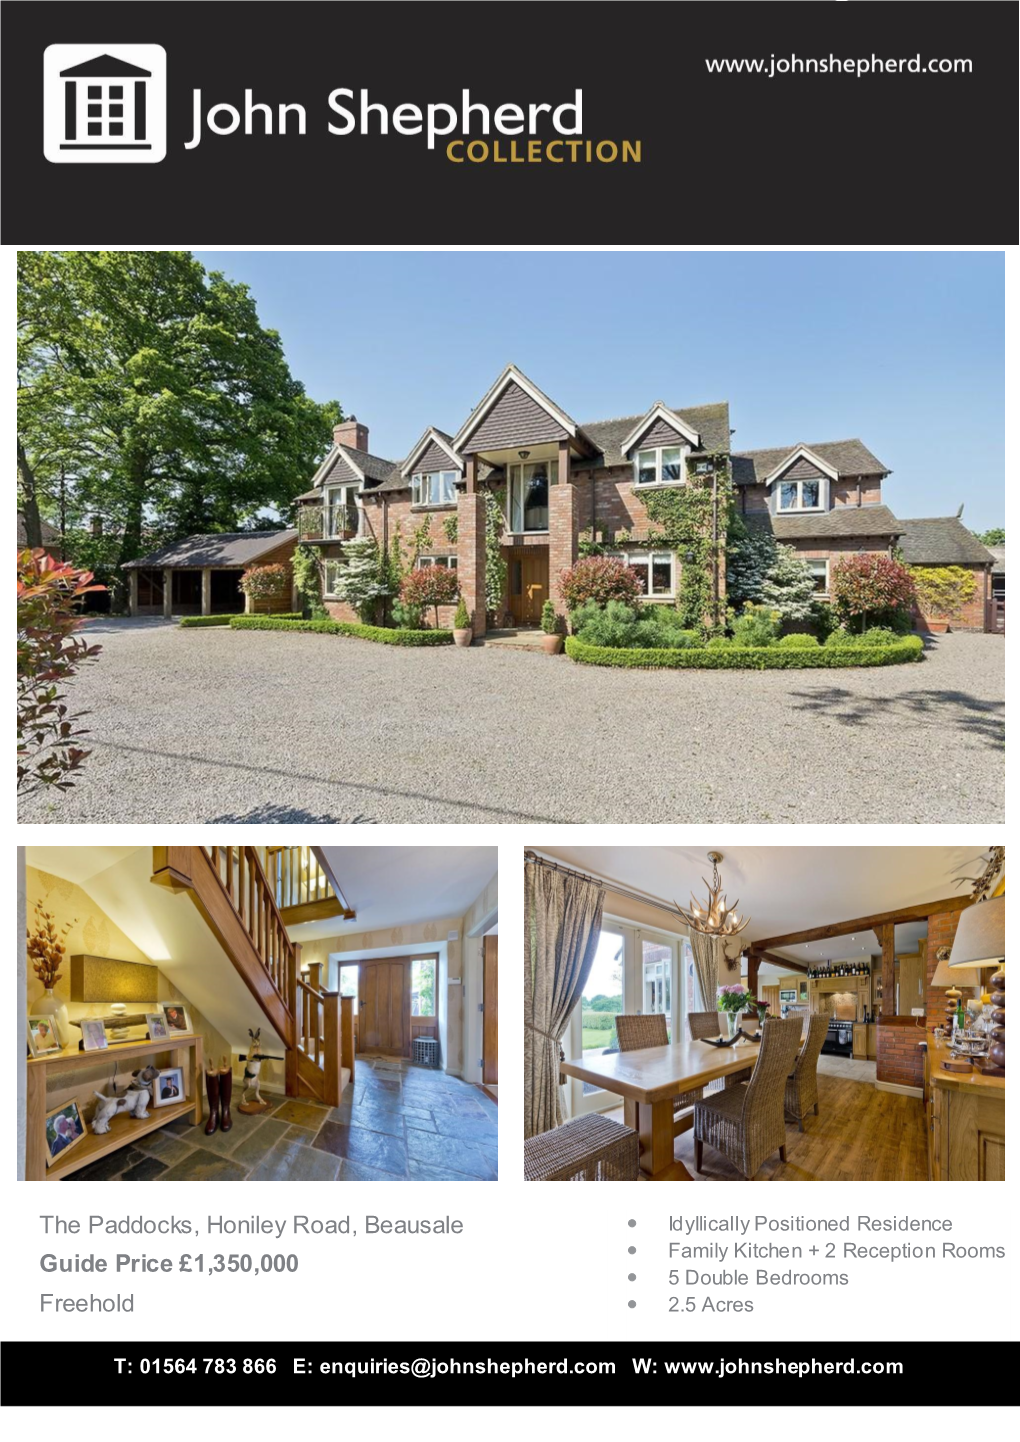 The Paddocks, Honiley Road, Beausale Guide Price £1,350,000